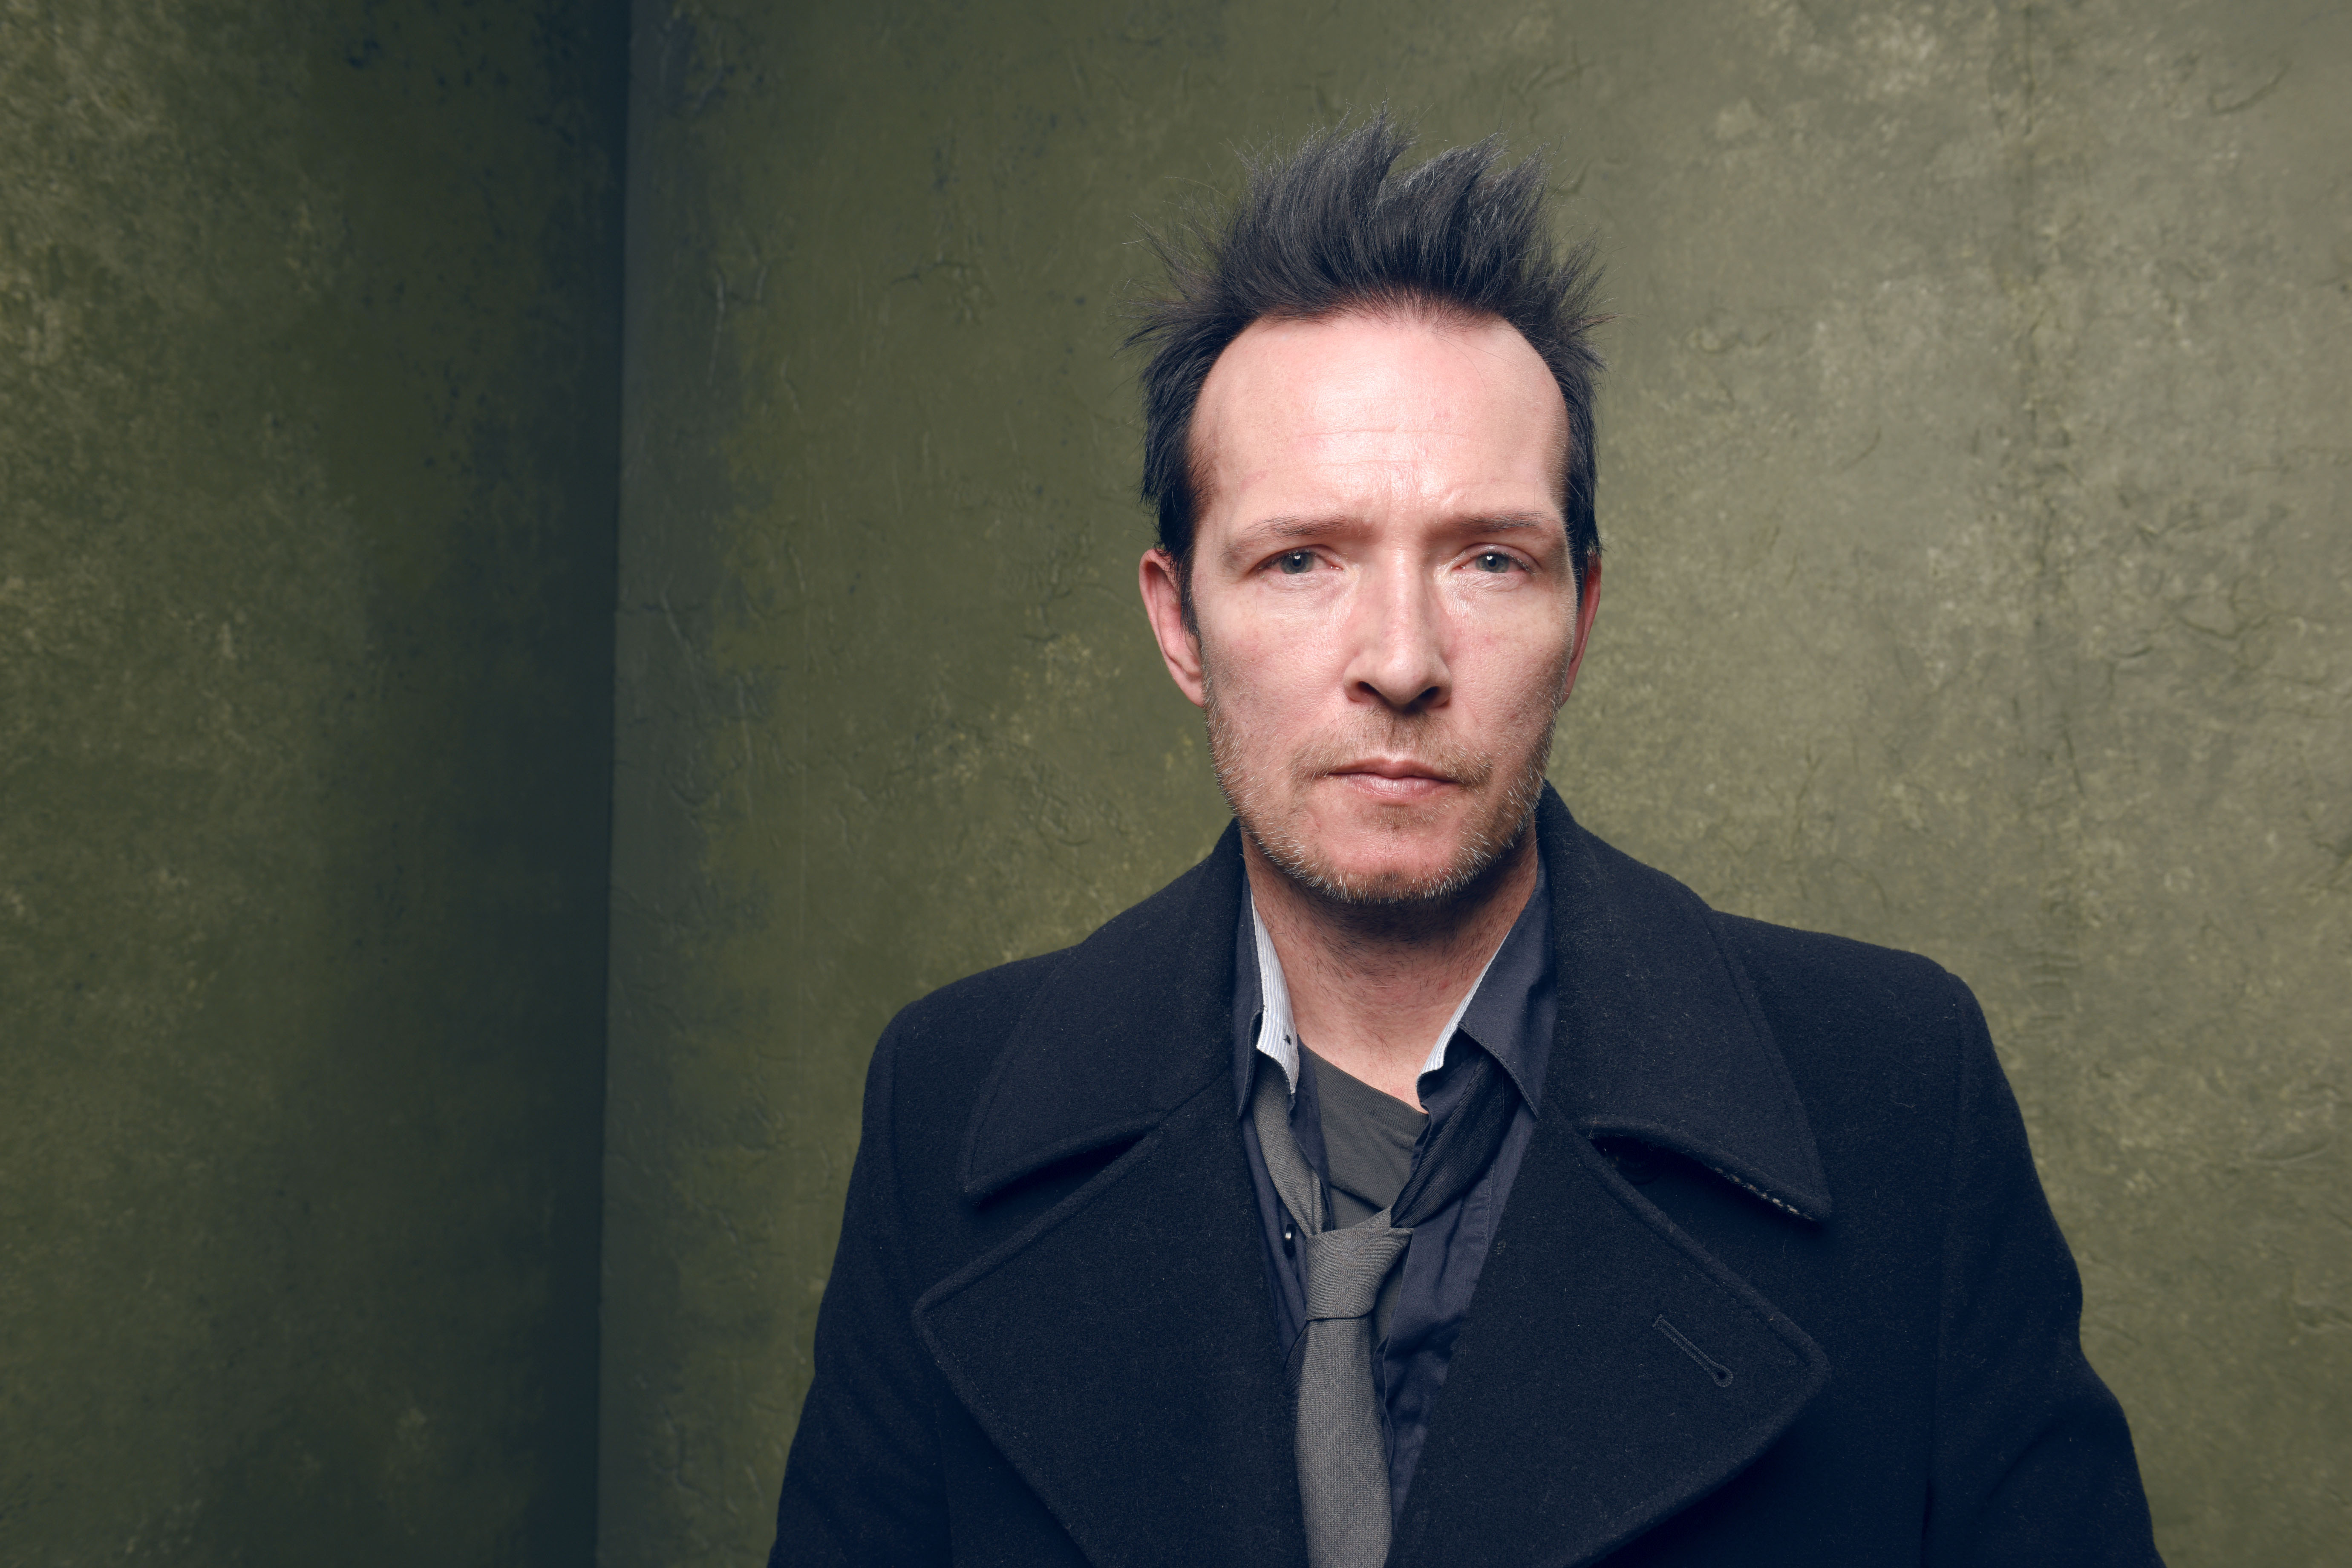 Scott Weiland on Jan. 24, 2015 (photo: Larry Busacca / Getty Images).